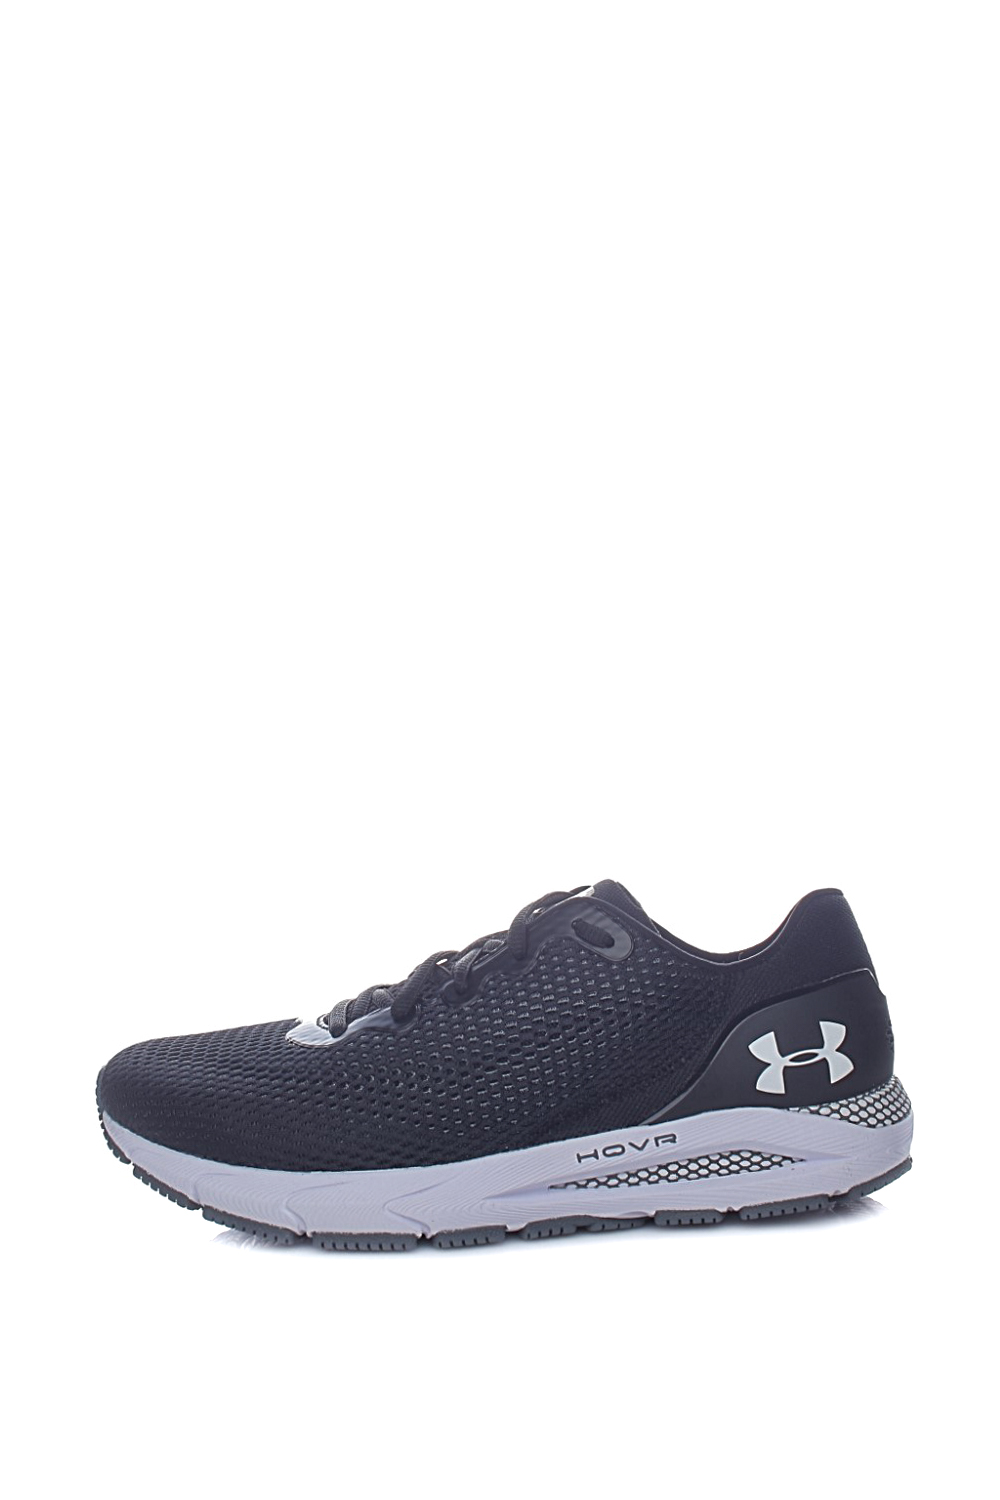 UNDER ARMOUR – Ανδρικά παπούτσια running UNDER ARMOUR HOVR Sonic 4 μαύρα 1808496.0-7393